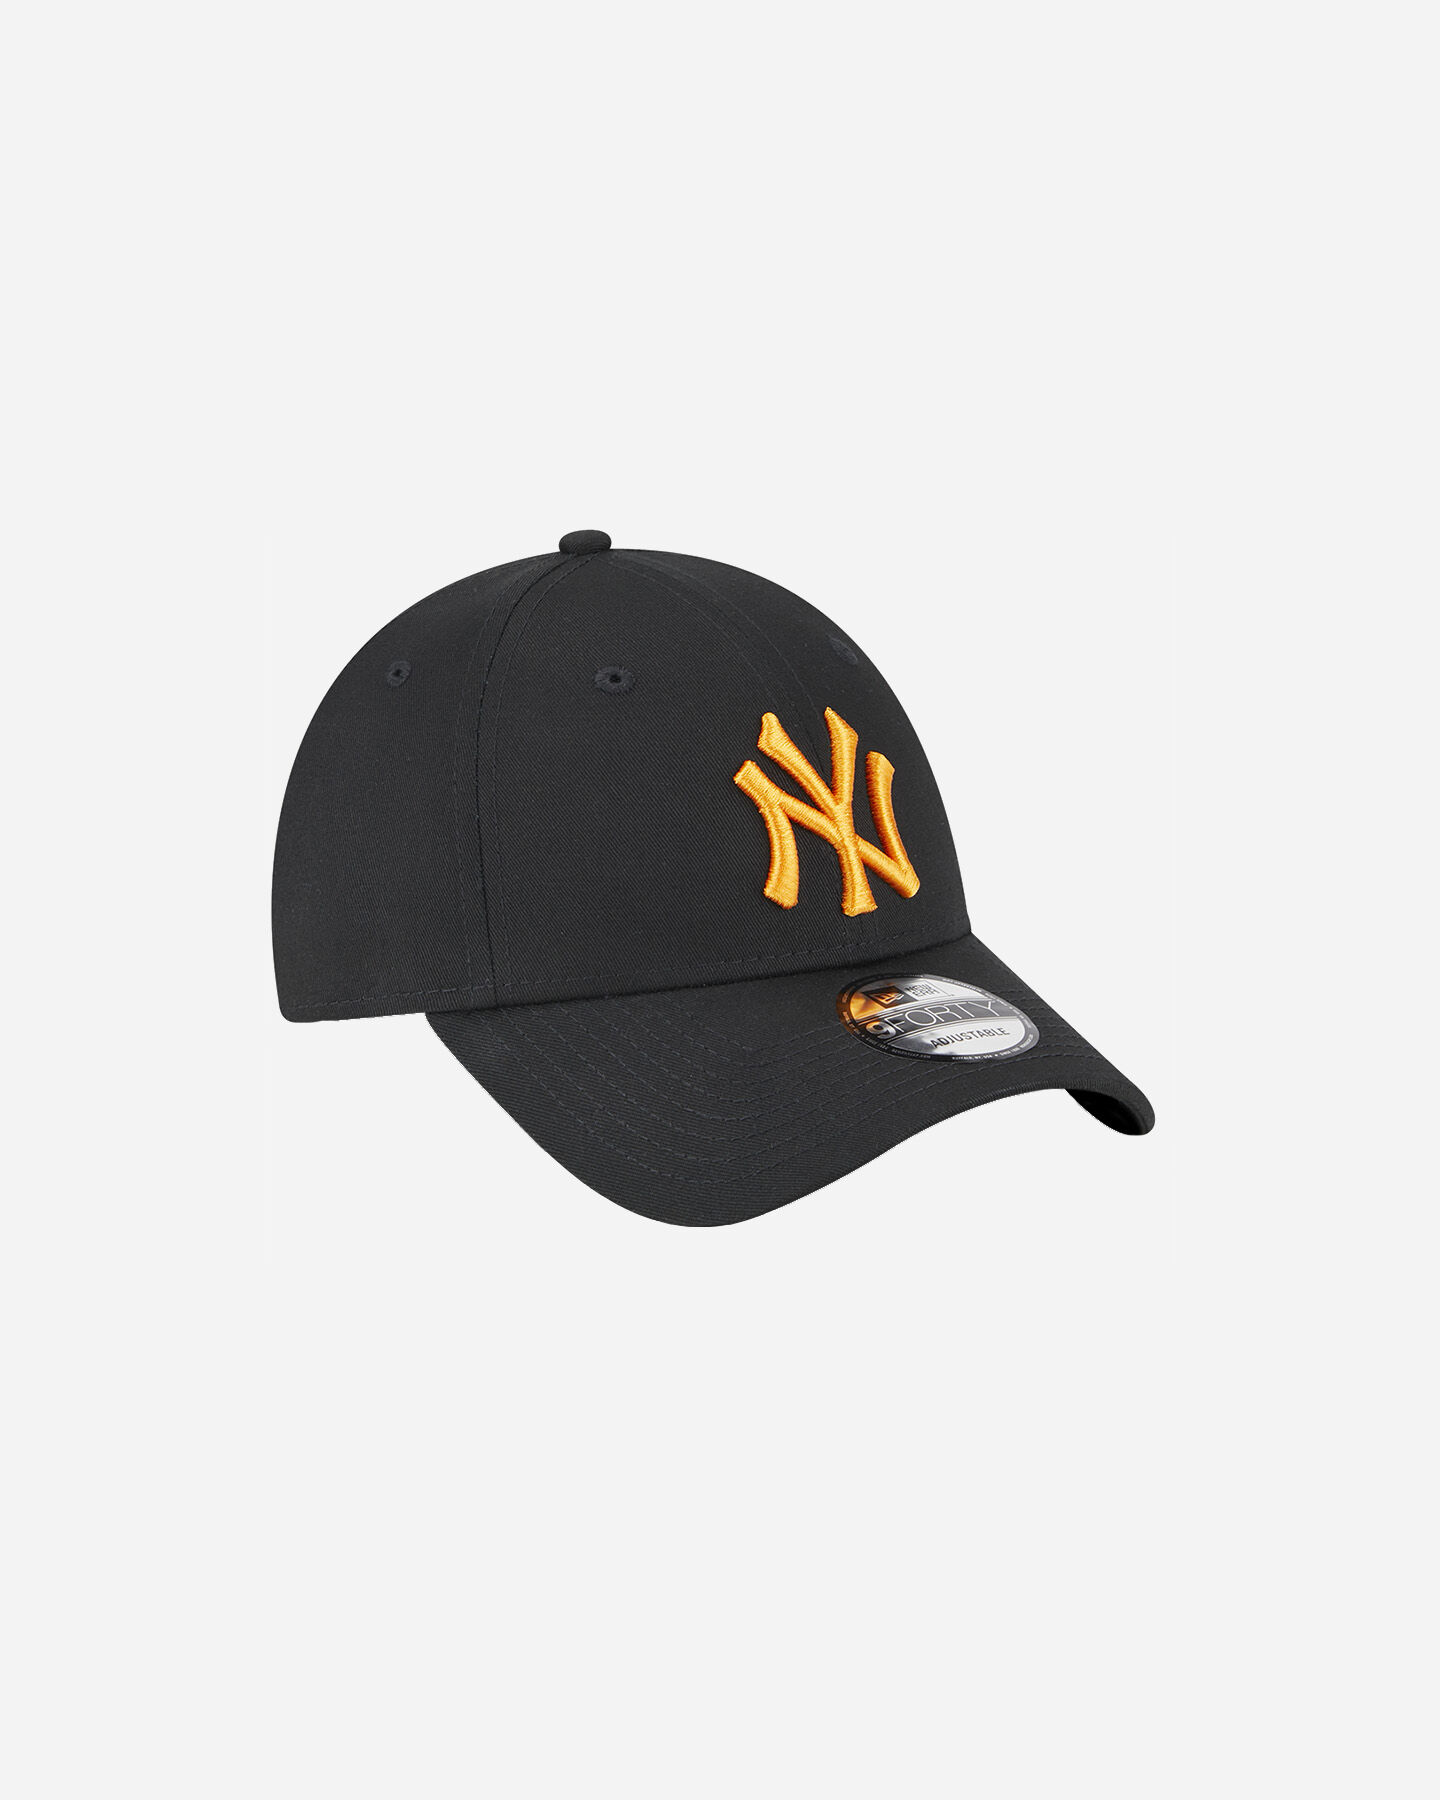  Cappellino NEW ERA 9FORTY MLB LEAGUE NEW YORK YANKEES  S5630961|001|OSFM scatto 2